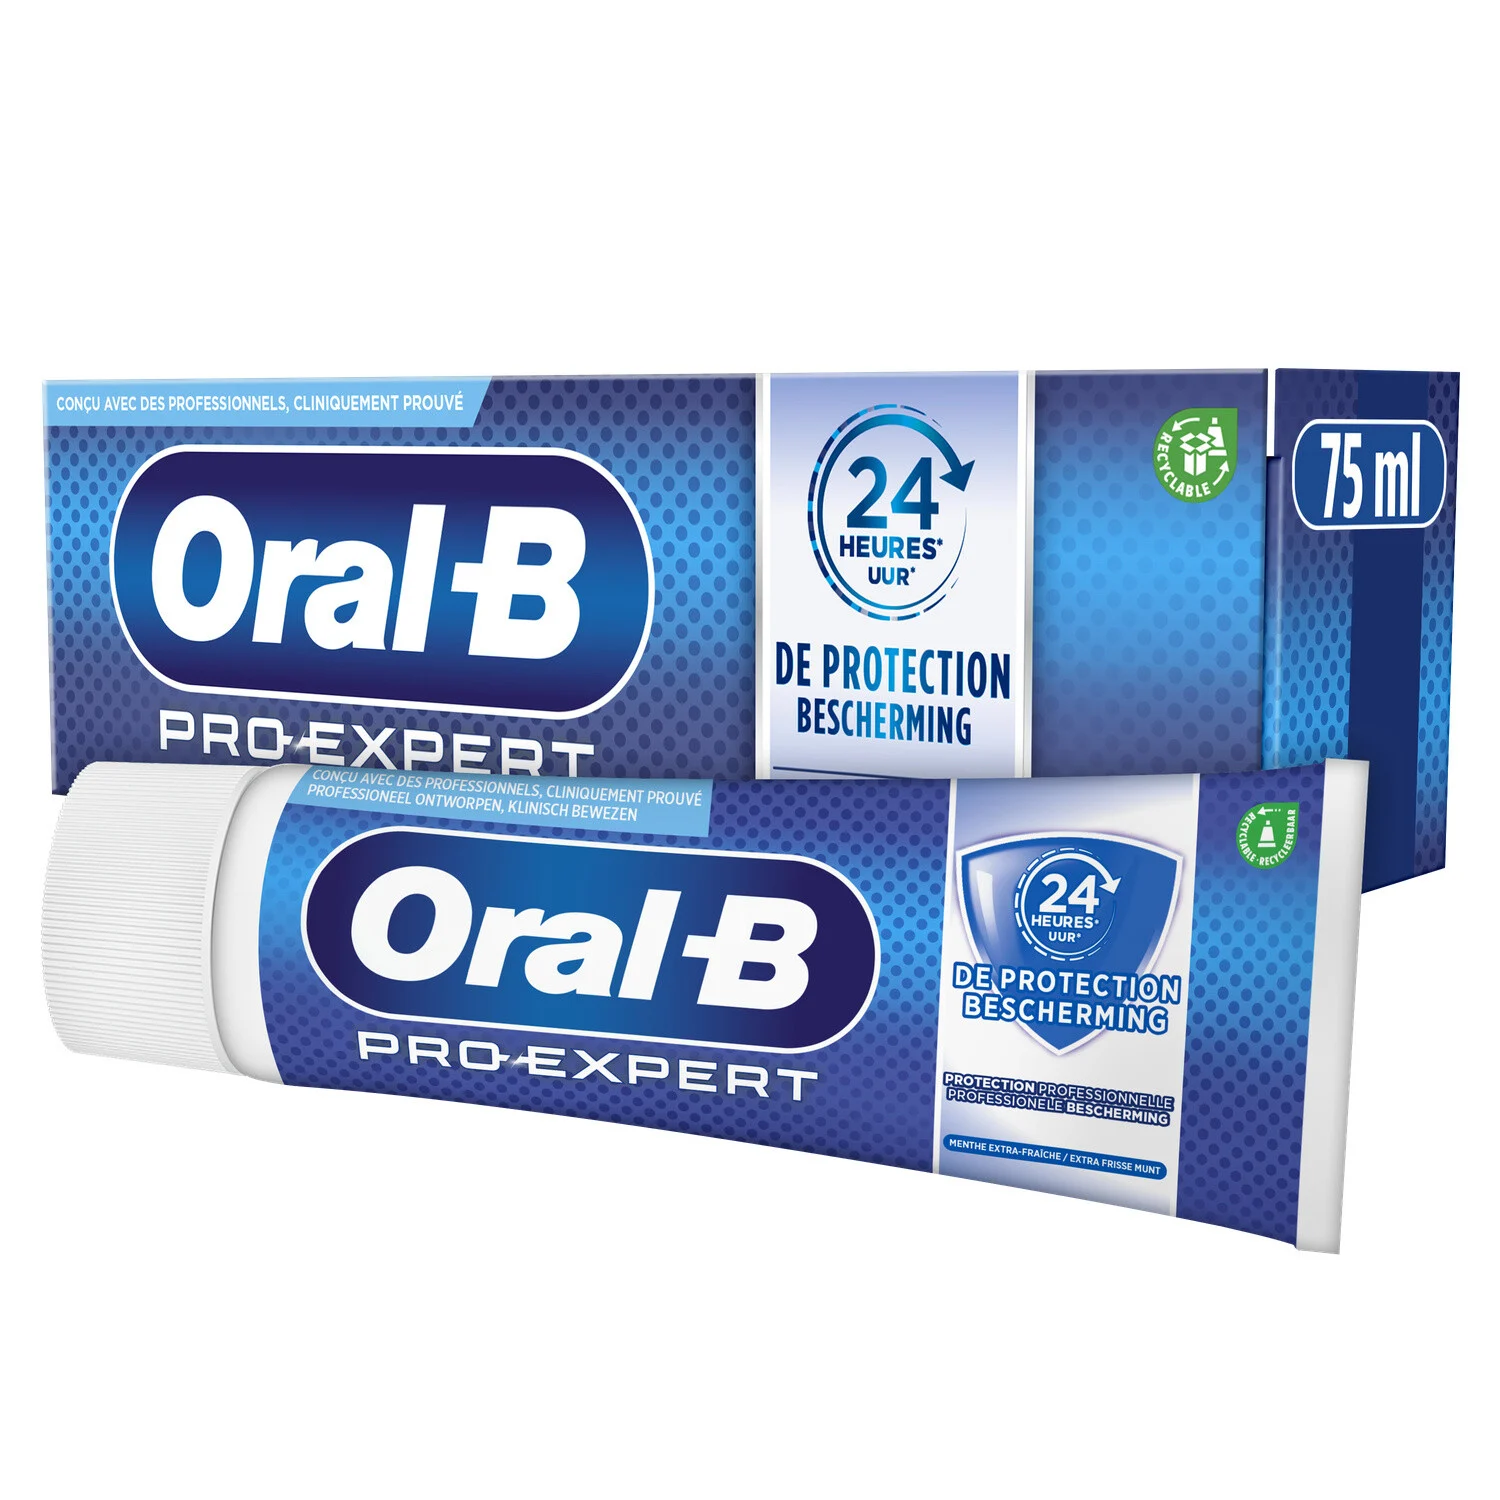 75ml Oral B Dent Protect 薄荷味